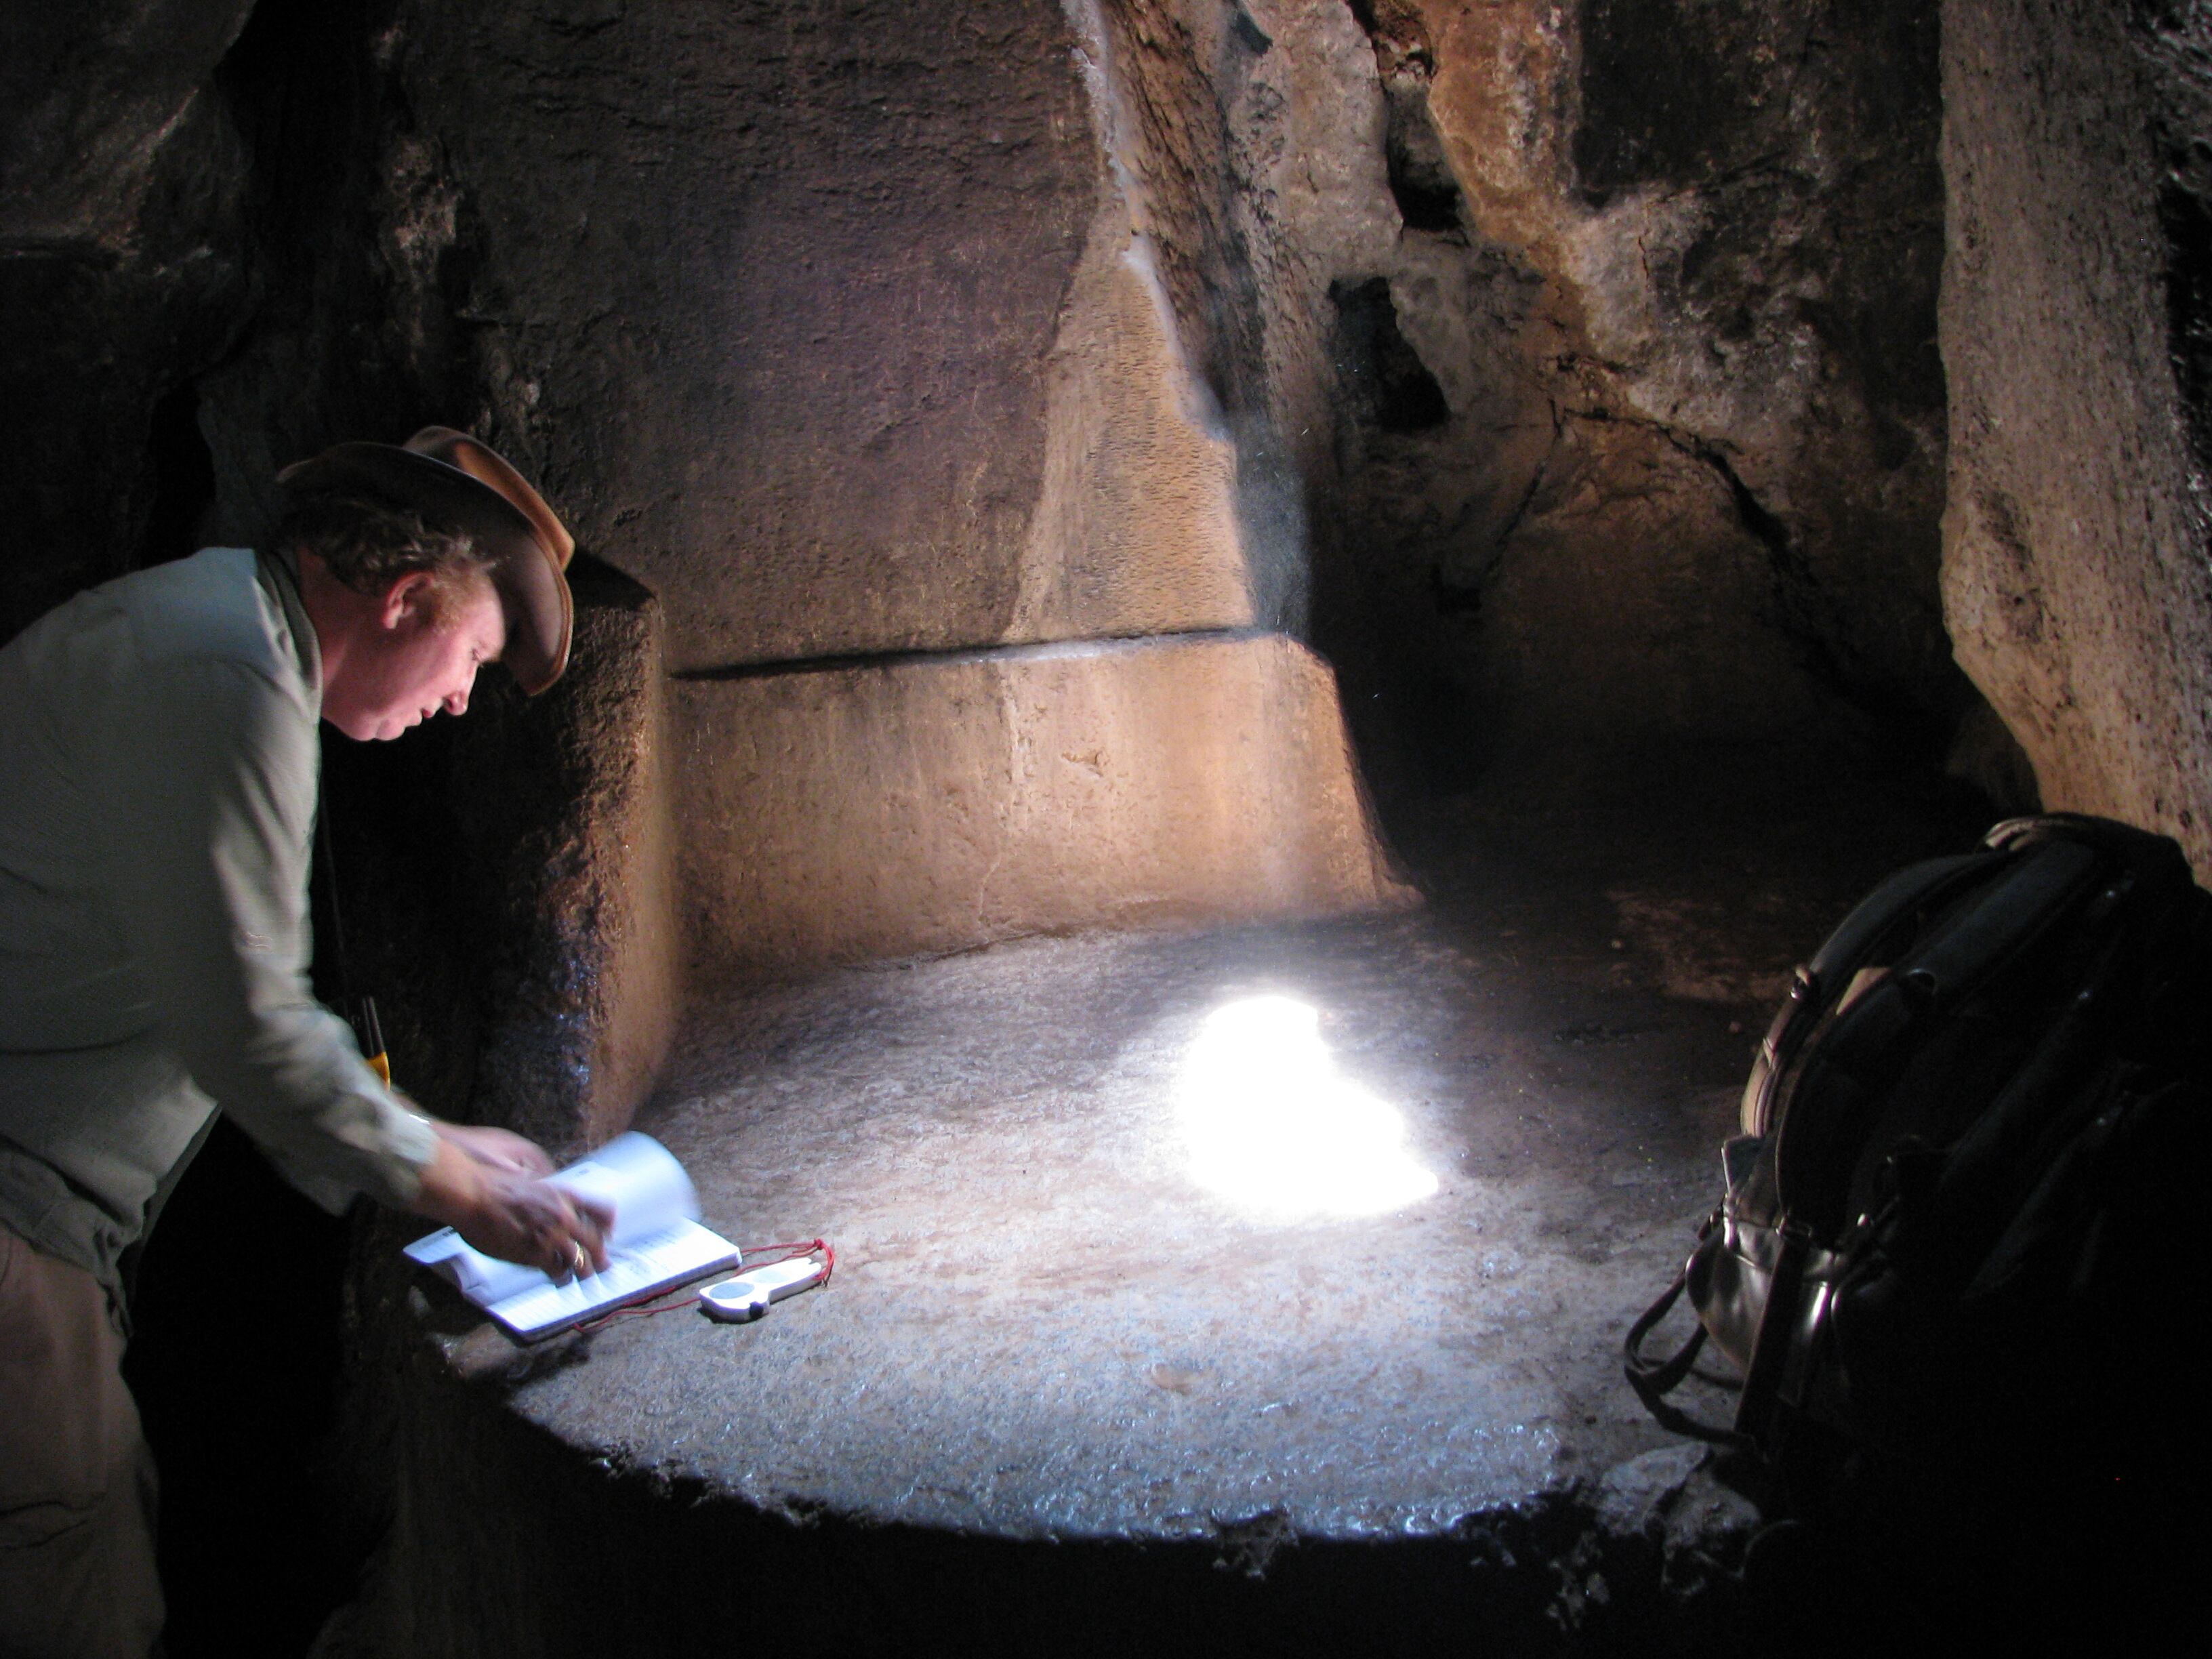 The zenithal sun shining on the altar of the inner chamber of a cave southeast of Lacco in Peru.